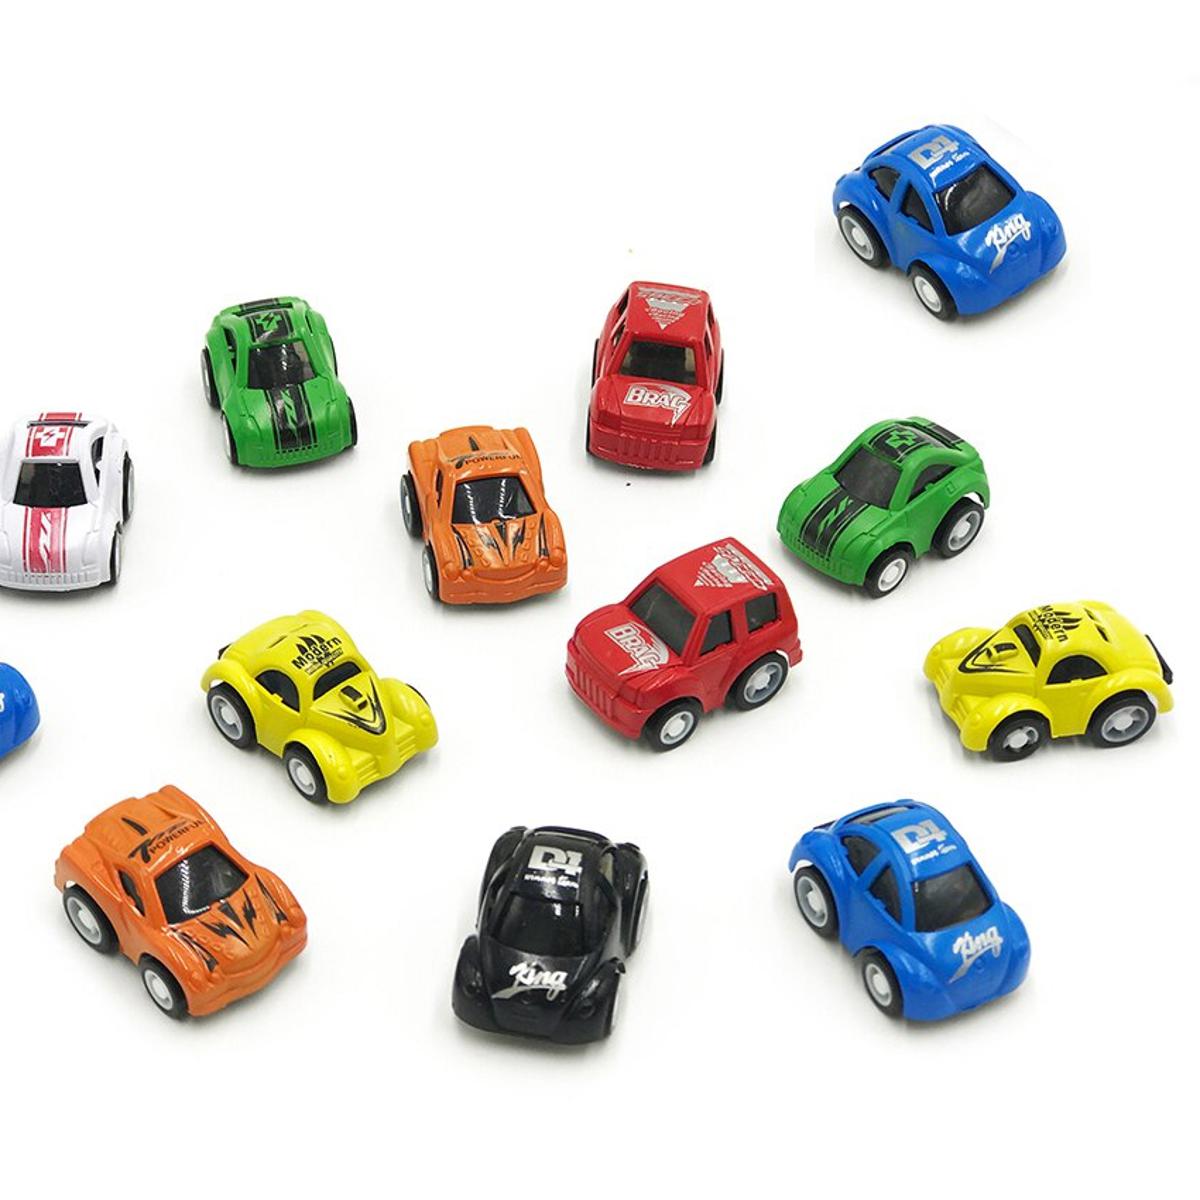 3 Pcs - Mini Pull-back Auto Racing Car Toy Set For Kids Girls And Boys